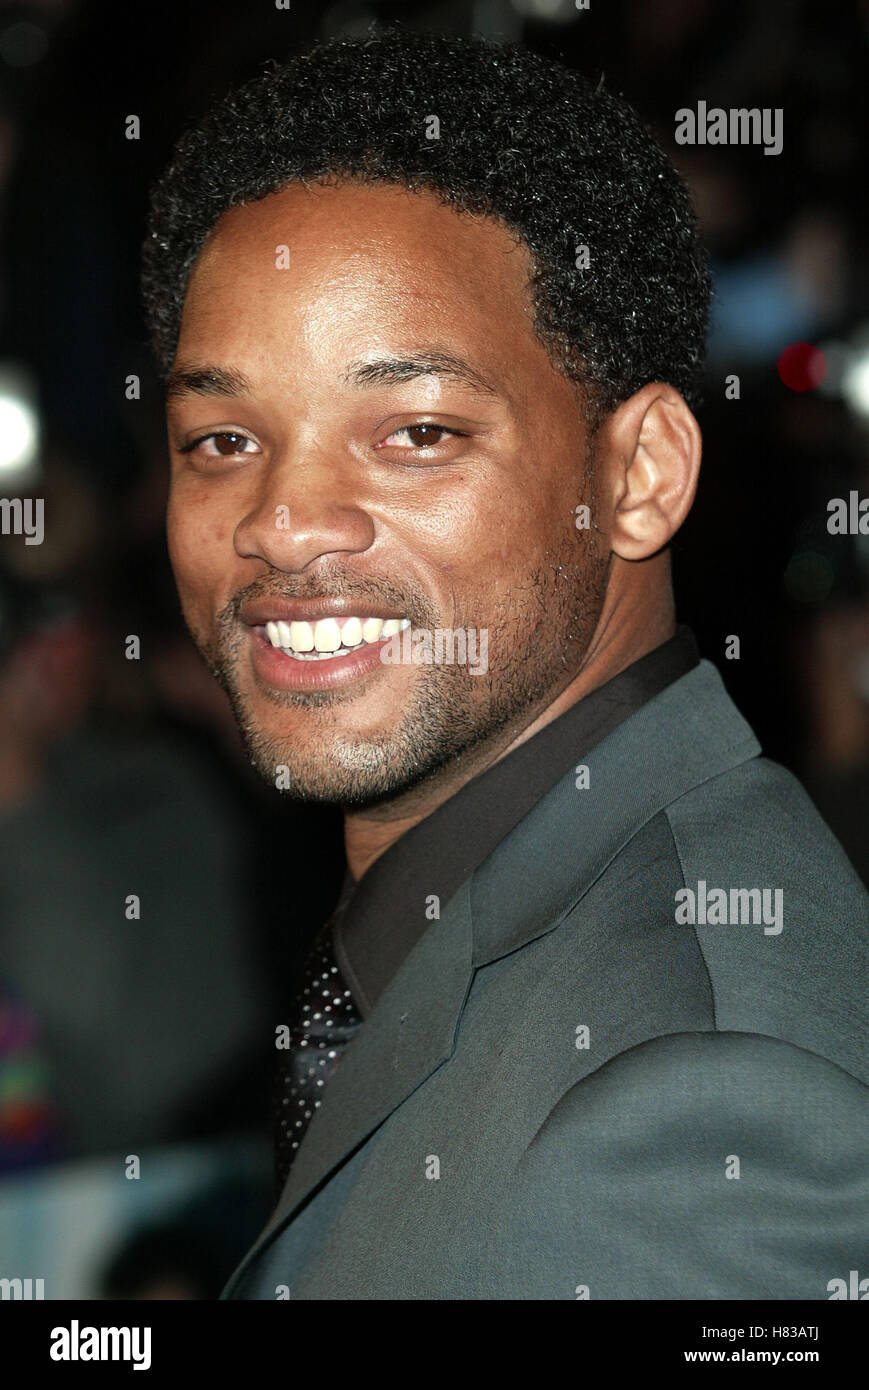 WILL SMITH SHOWTIME WORLD FILM PREMIERE HOLLYWOOD LOS ANGELES USA 11 March 2002 Stock Photo